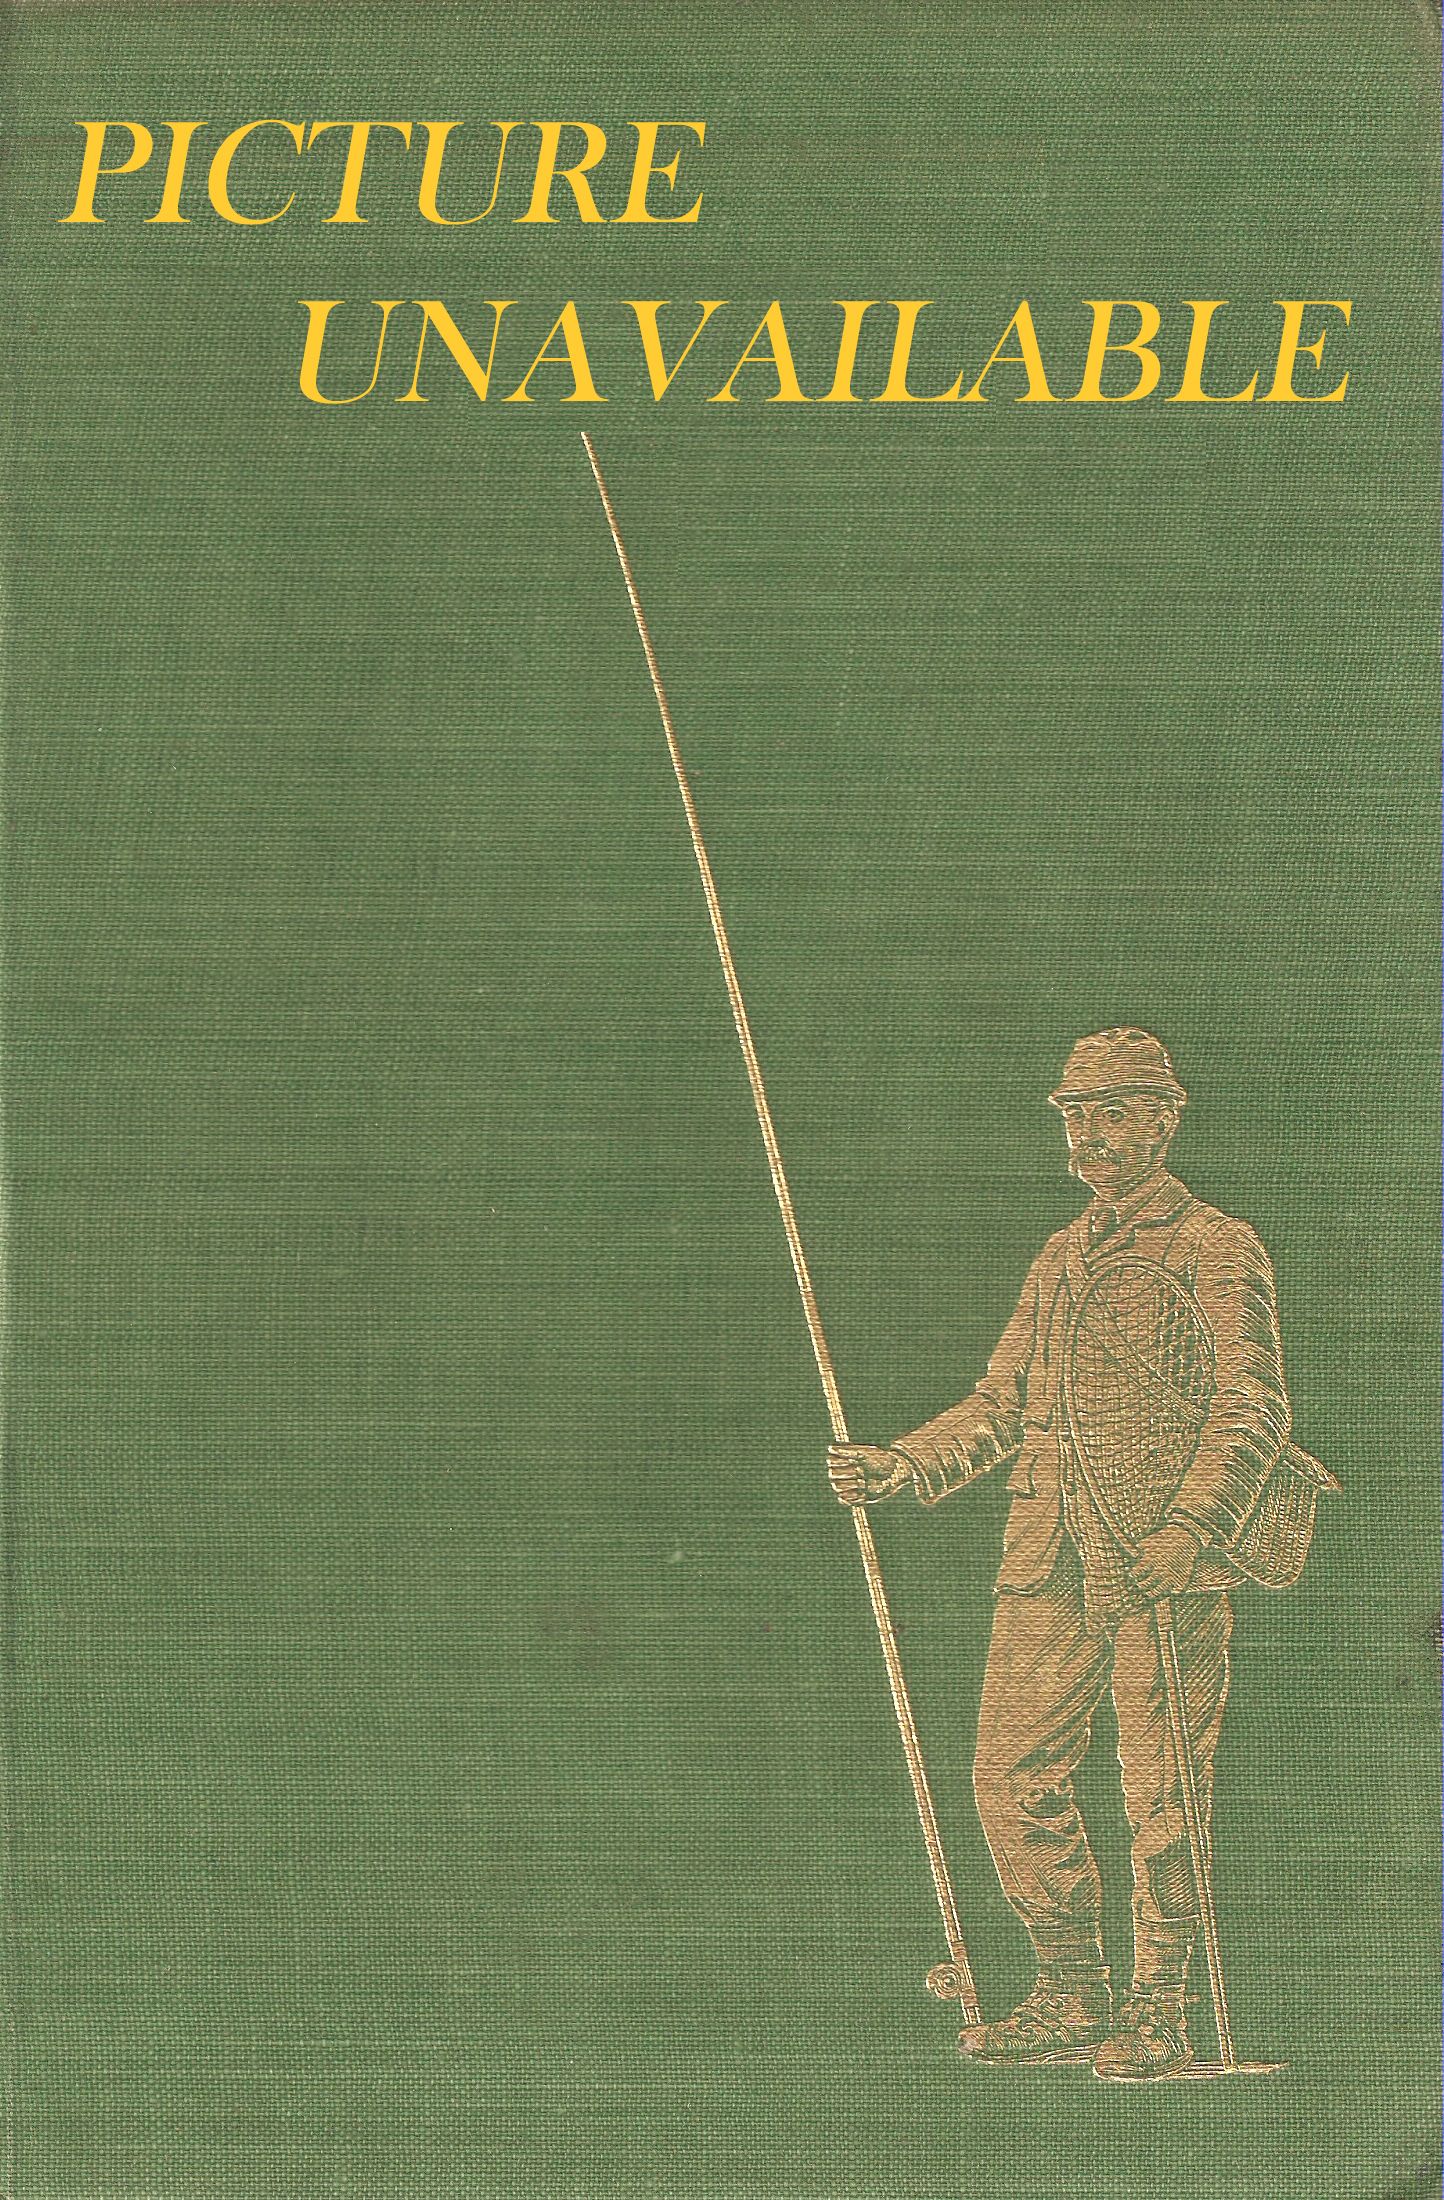 CLEAR WATERS: TROUTING DAYS AND TROUTING WAYS IN WALES, THE WEST COUNTRY,  AND THE SCOTTISH BORDERLAND. By A.G. Bradley.